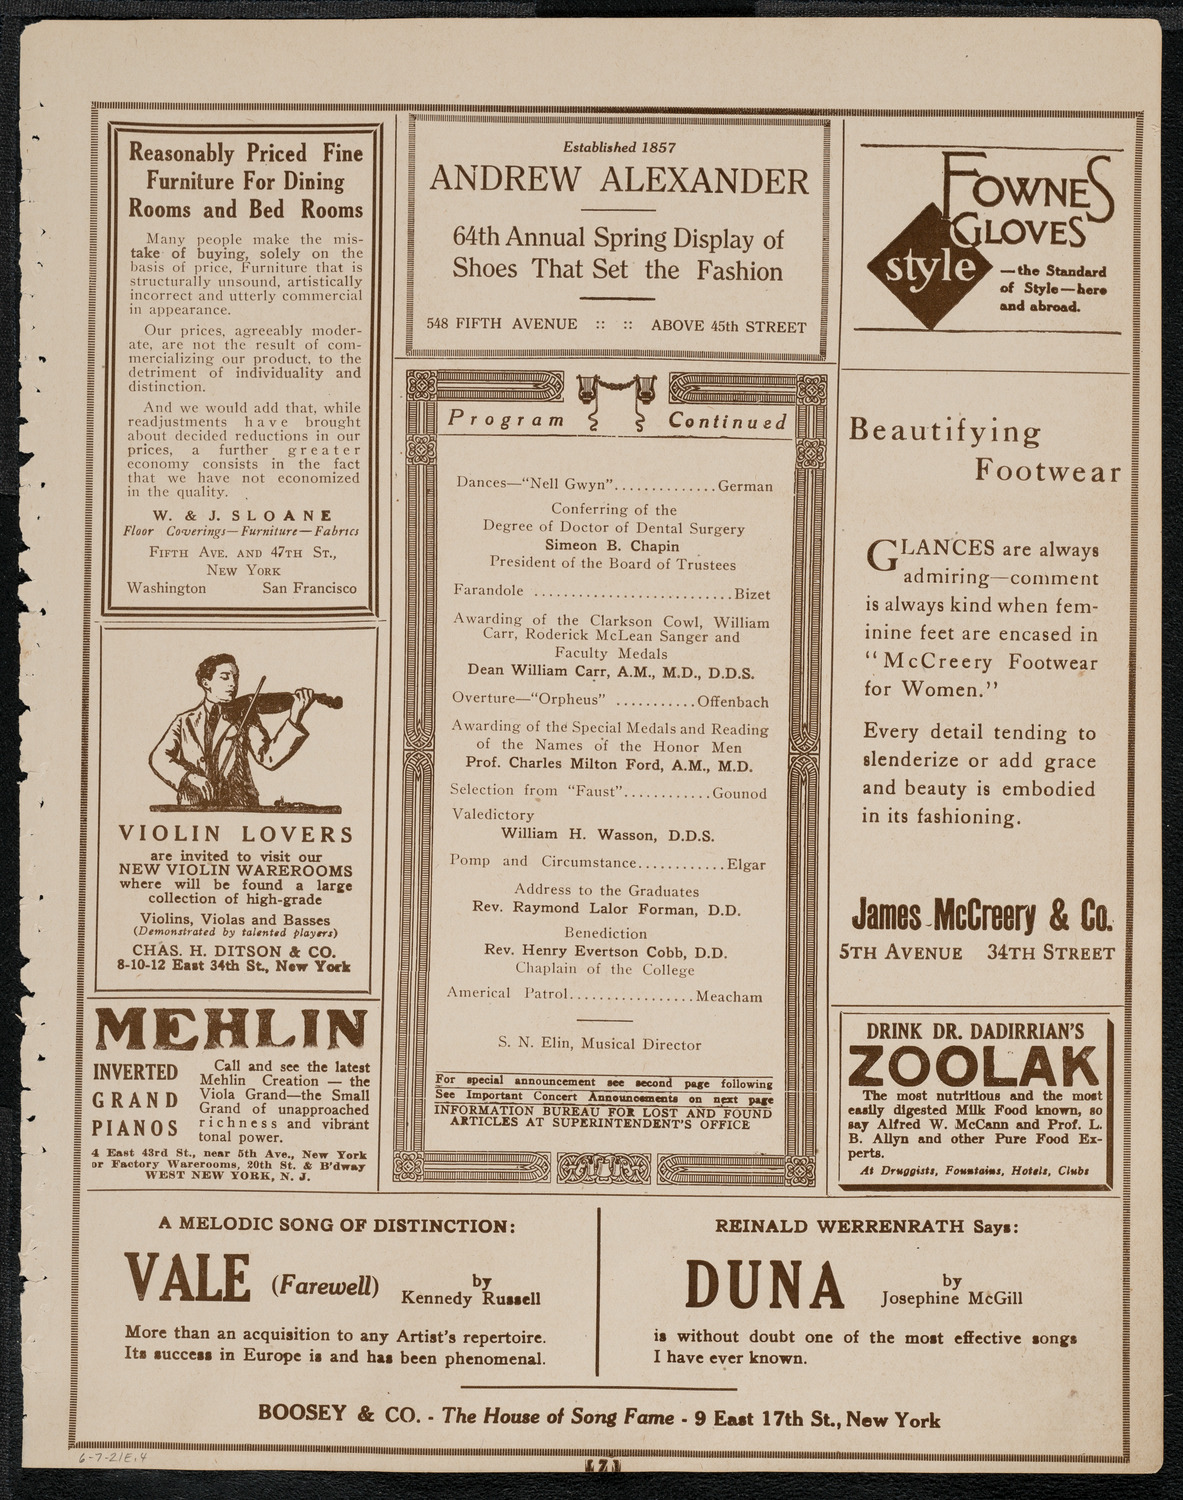 Graduation: College of Dental and Oral Surgery of New York, June 7, 1921, program page 7